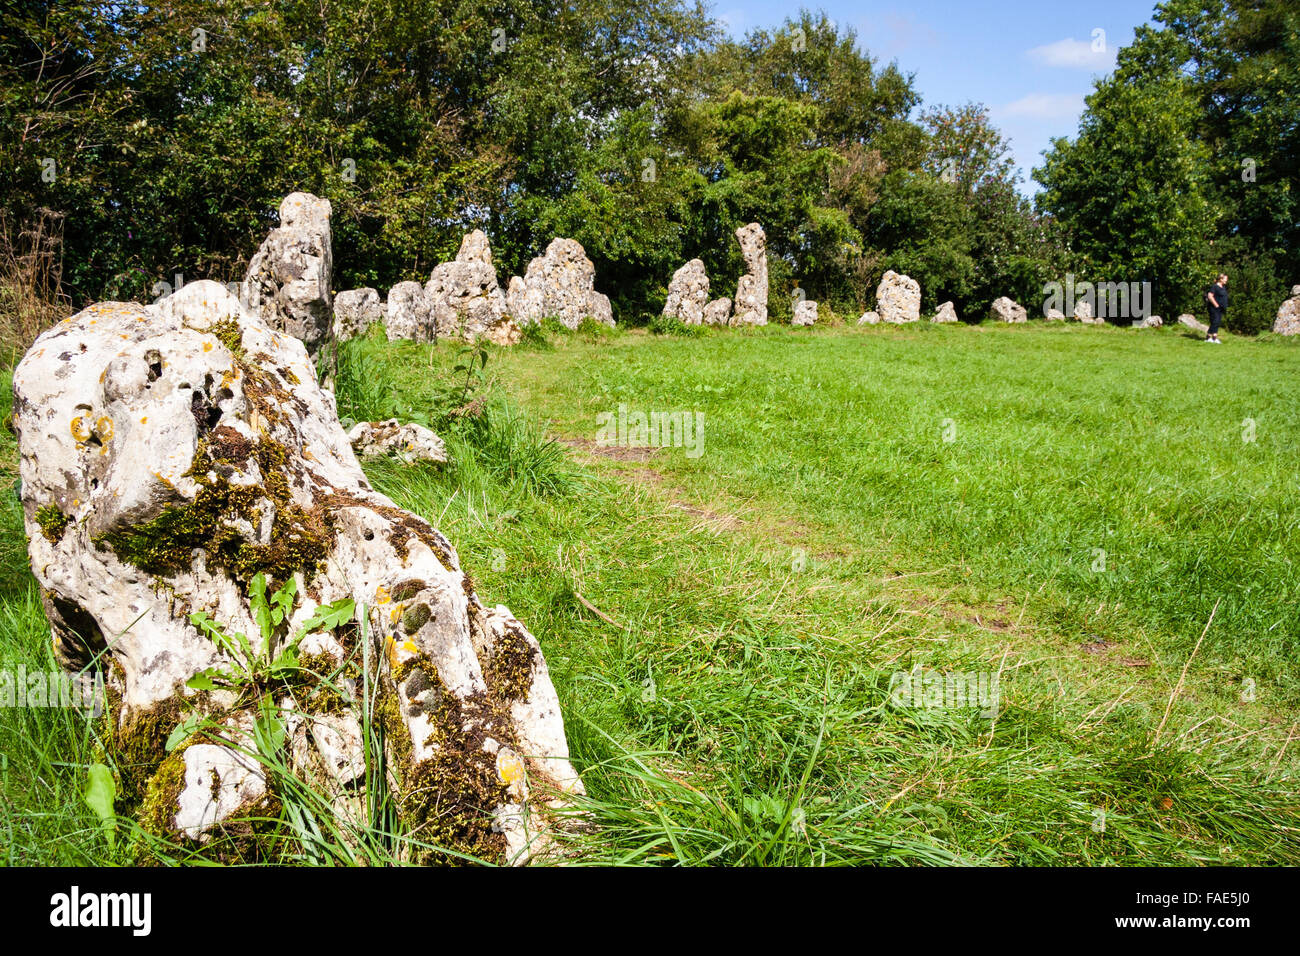 England, Oxfordshire, The Rollright stones. A late Neolithic, bronze age, ceremonial Stone Circle, called 'The King's Men'. Daytime, summer, blue sky. Stock Photo